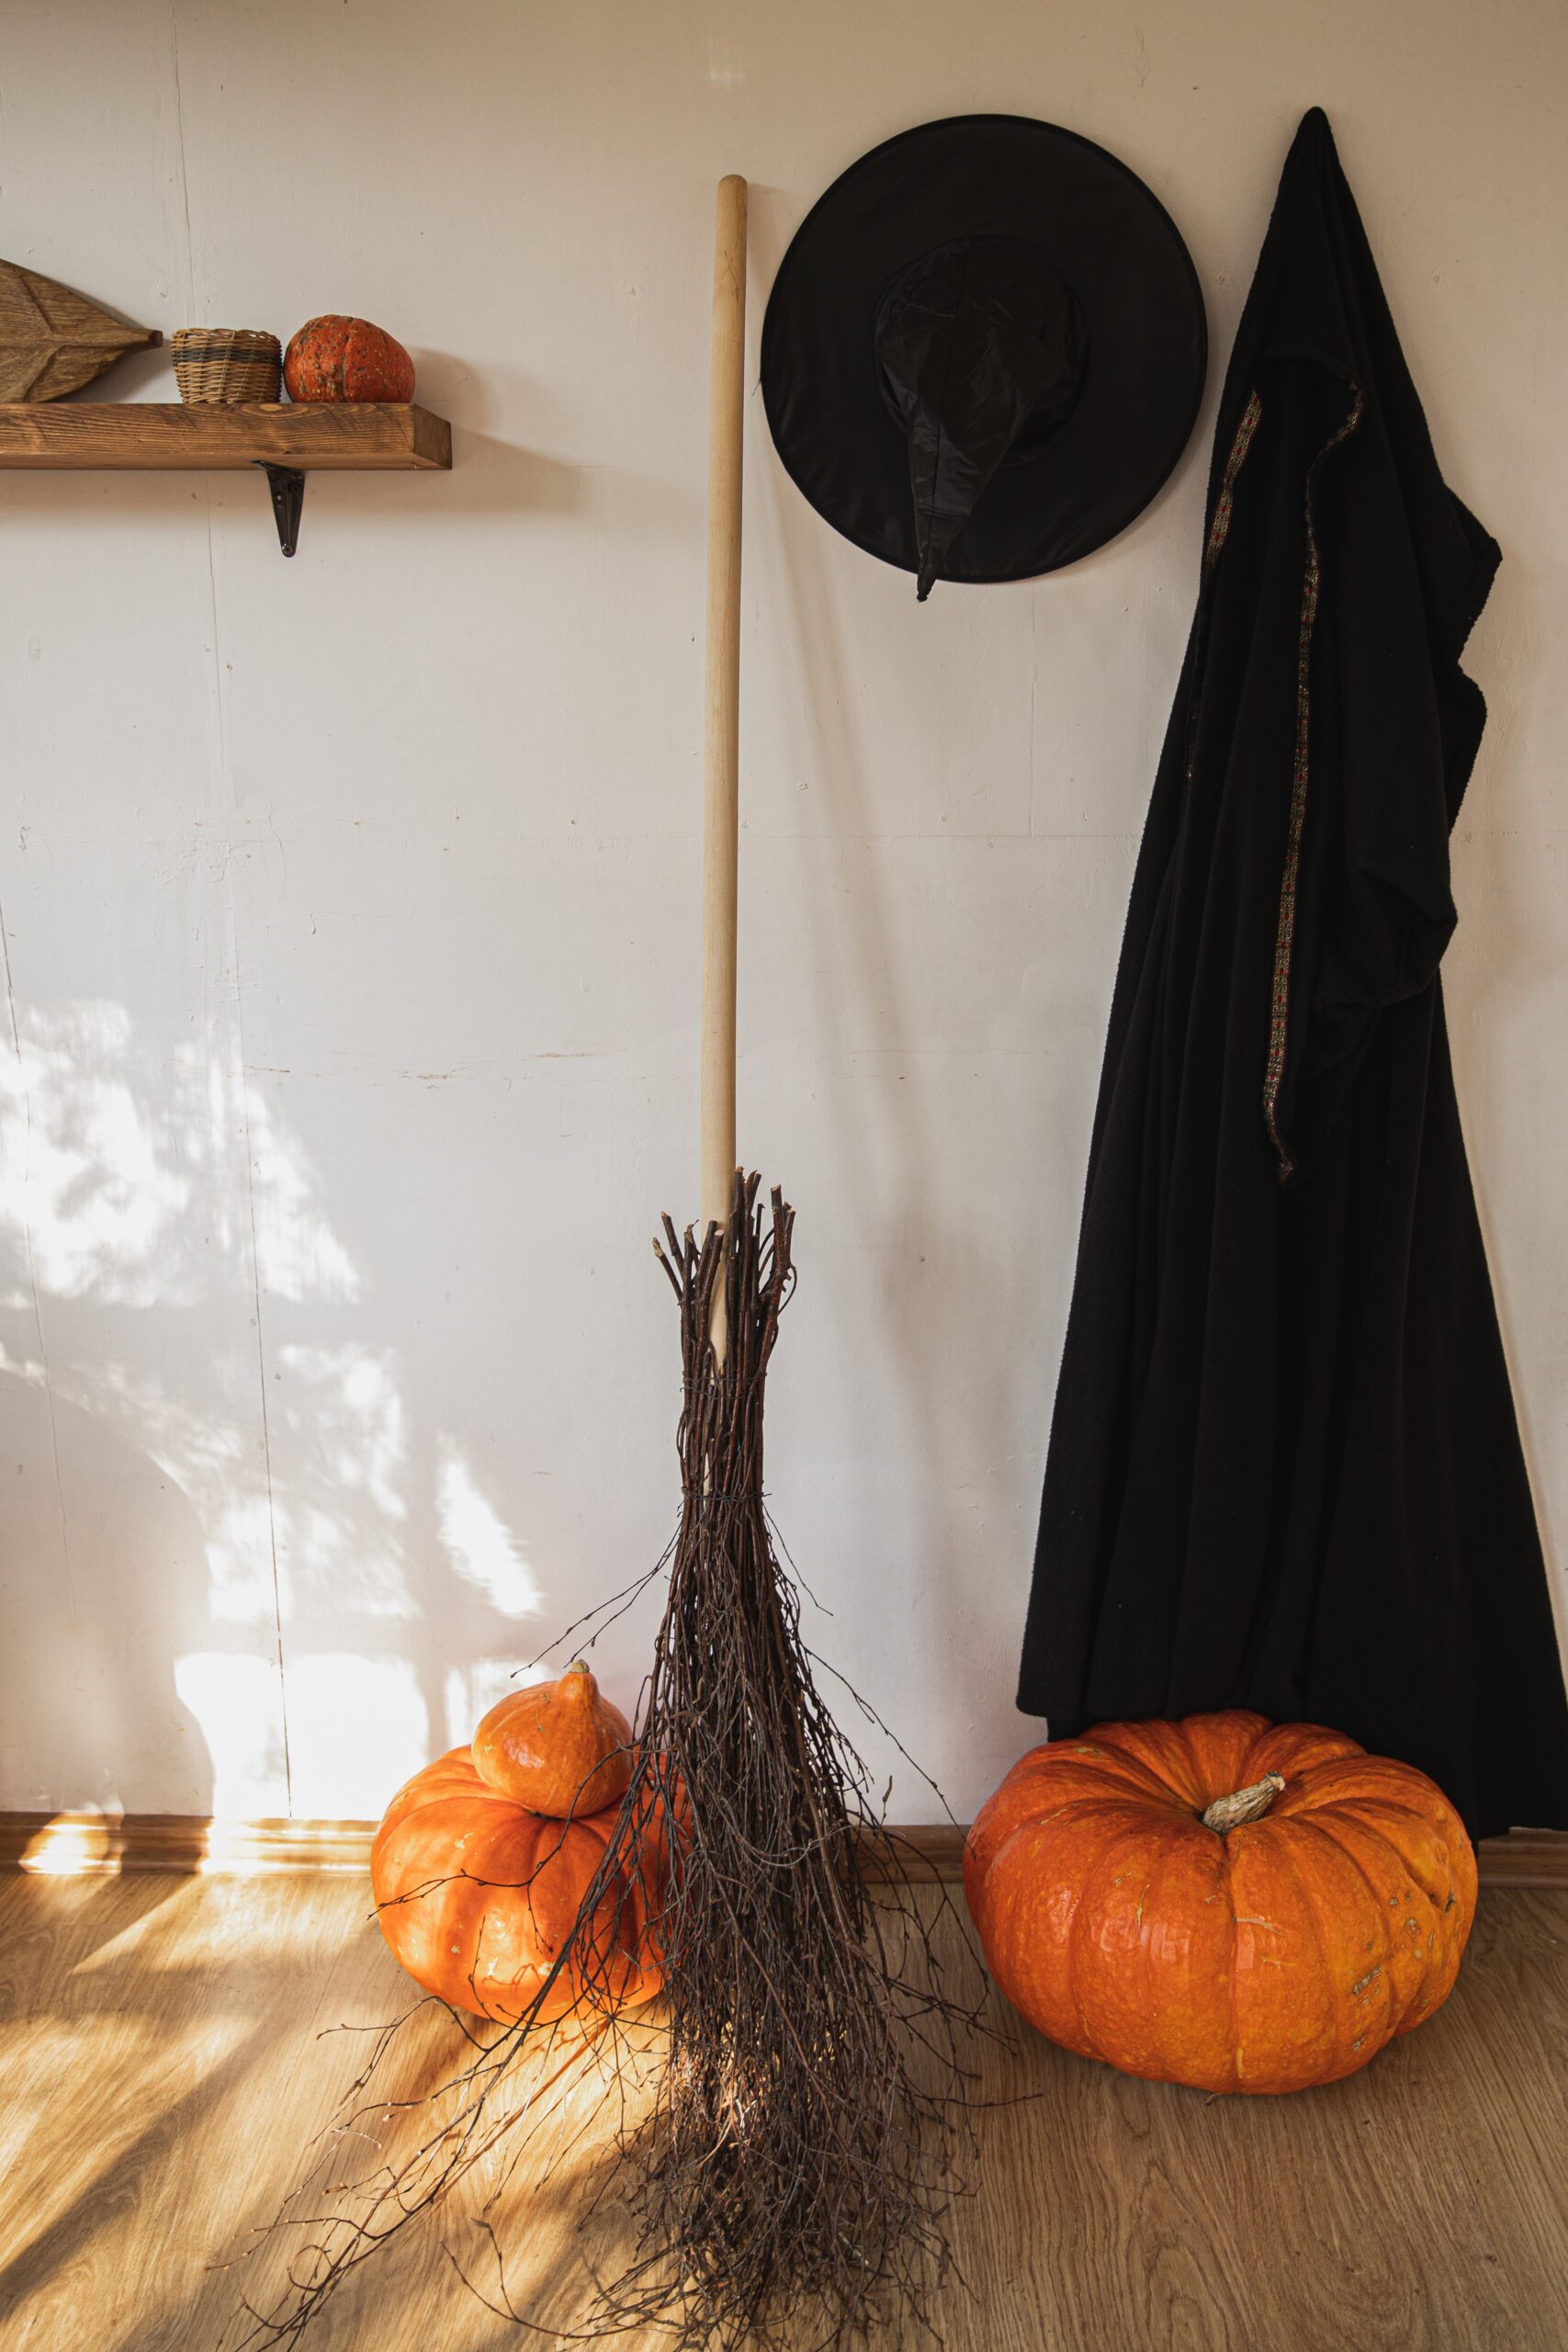 This post is about chic Halloween decorations for spooky season.